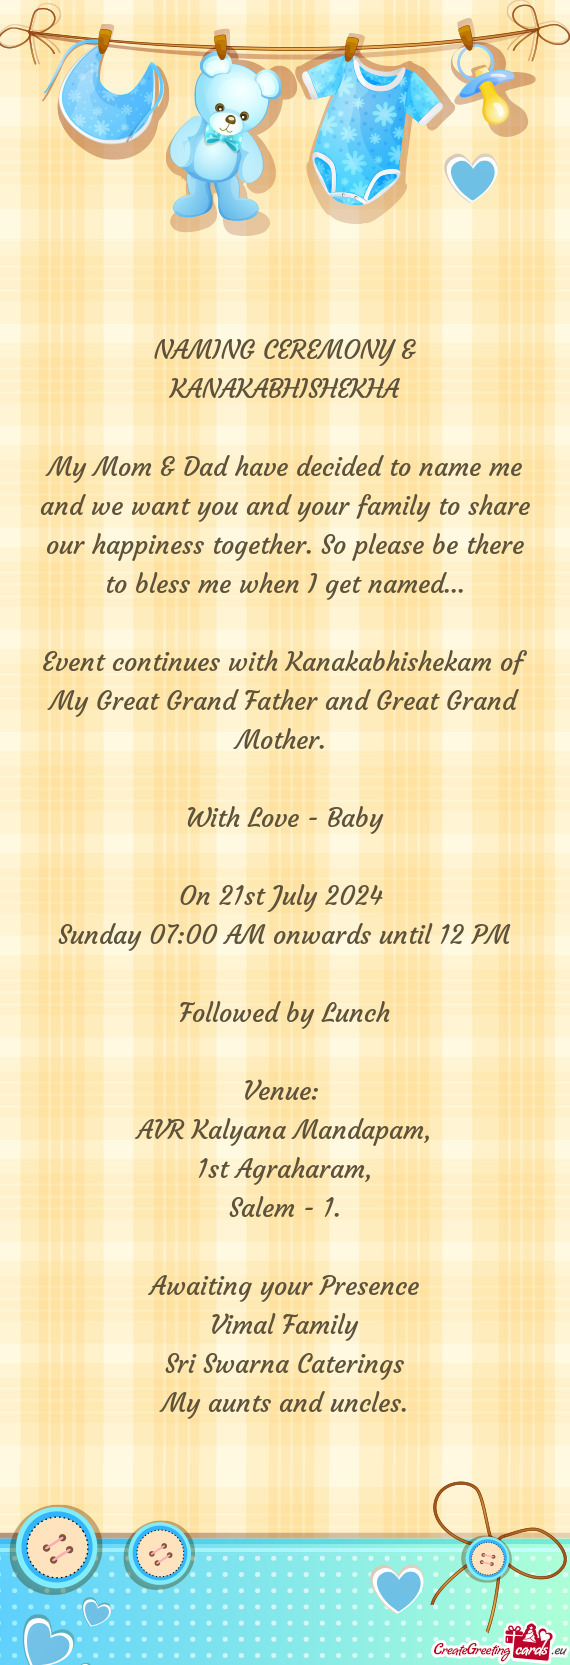 Event continues with Kanakabhishekam of My Great Grand Father and Great Grand Mother